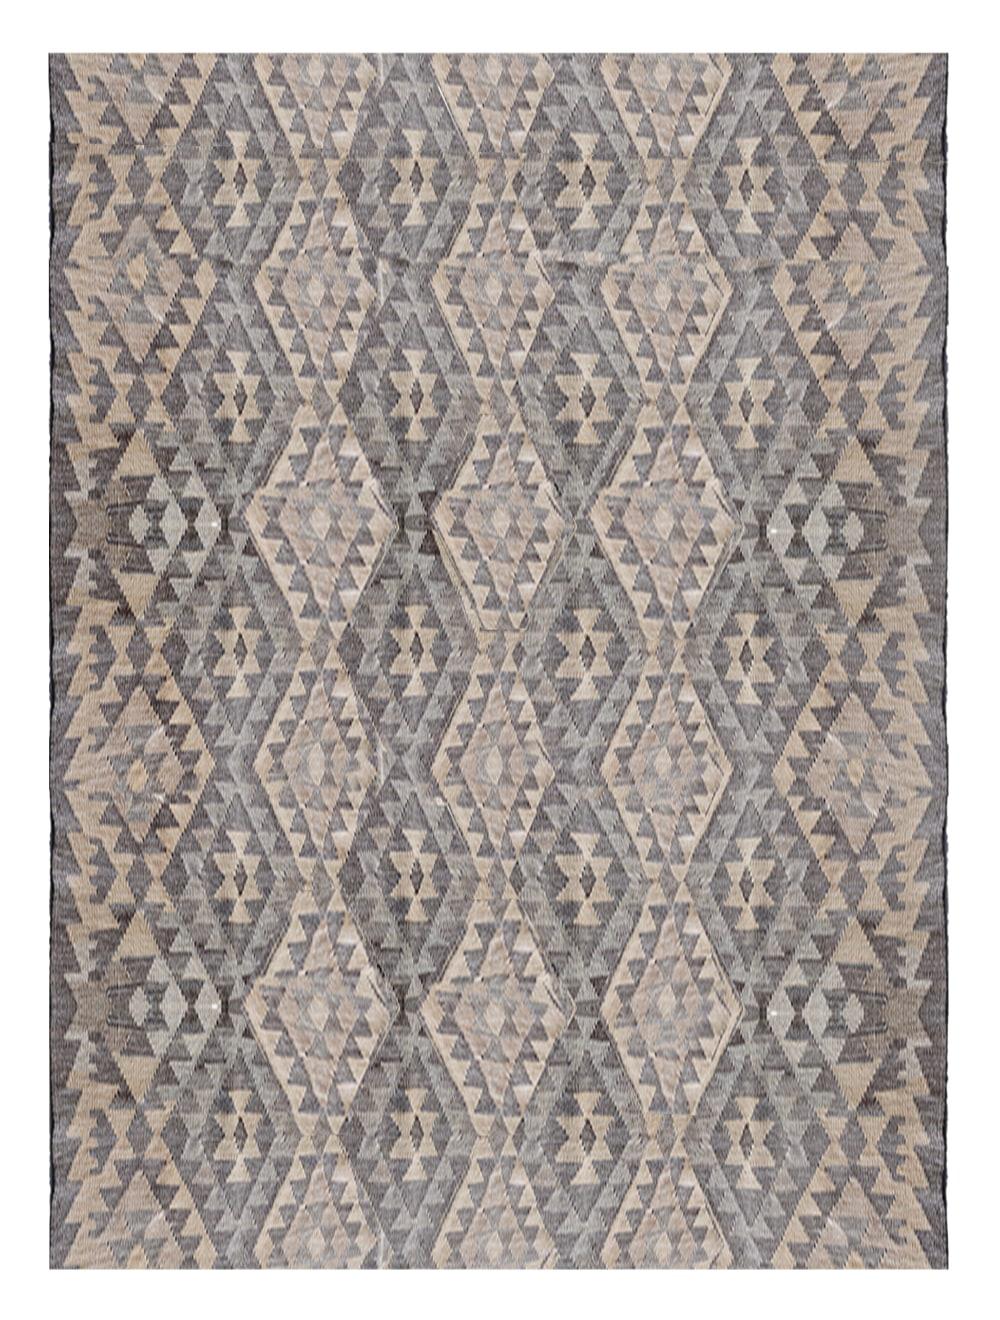 Light Grey Natural Kelim Carpet by Massimo Copenhagen
Handwoven
Materials: 100% Afghan wool.
Dimensions: W 200 x H 300 cm.
Other dimensions are available: 170x240 cm,

Each rug is unique and the combination of traditional weaving methods and